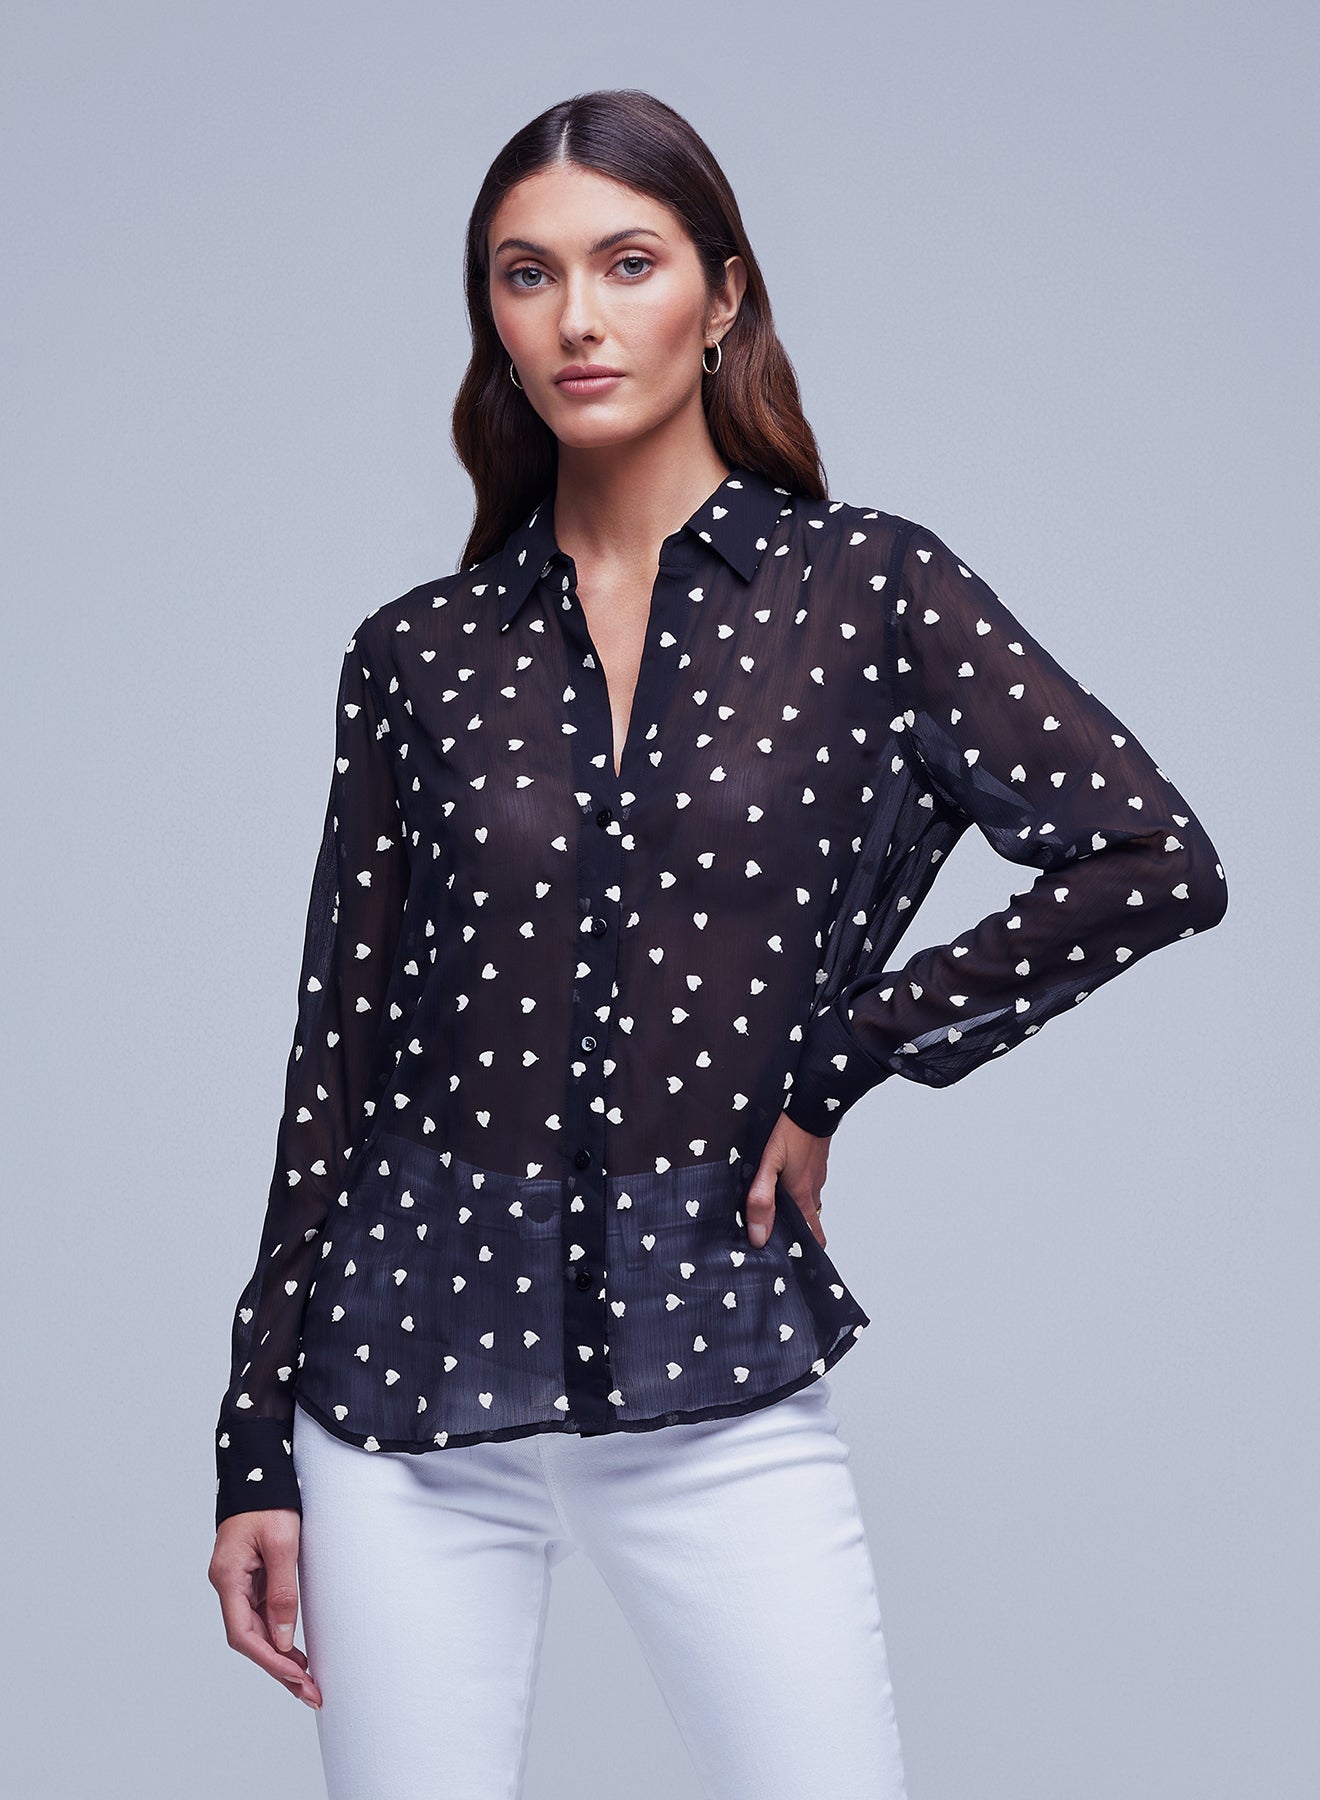 Laurent Blouse with Heart Embroidery in Black/Ivory by L'AGENCE